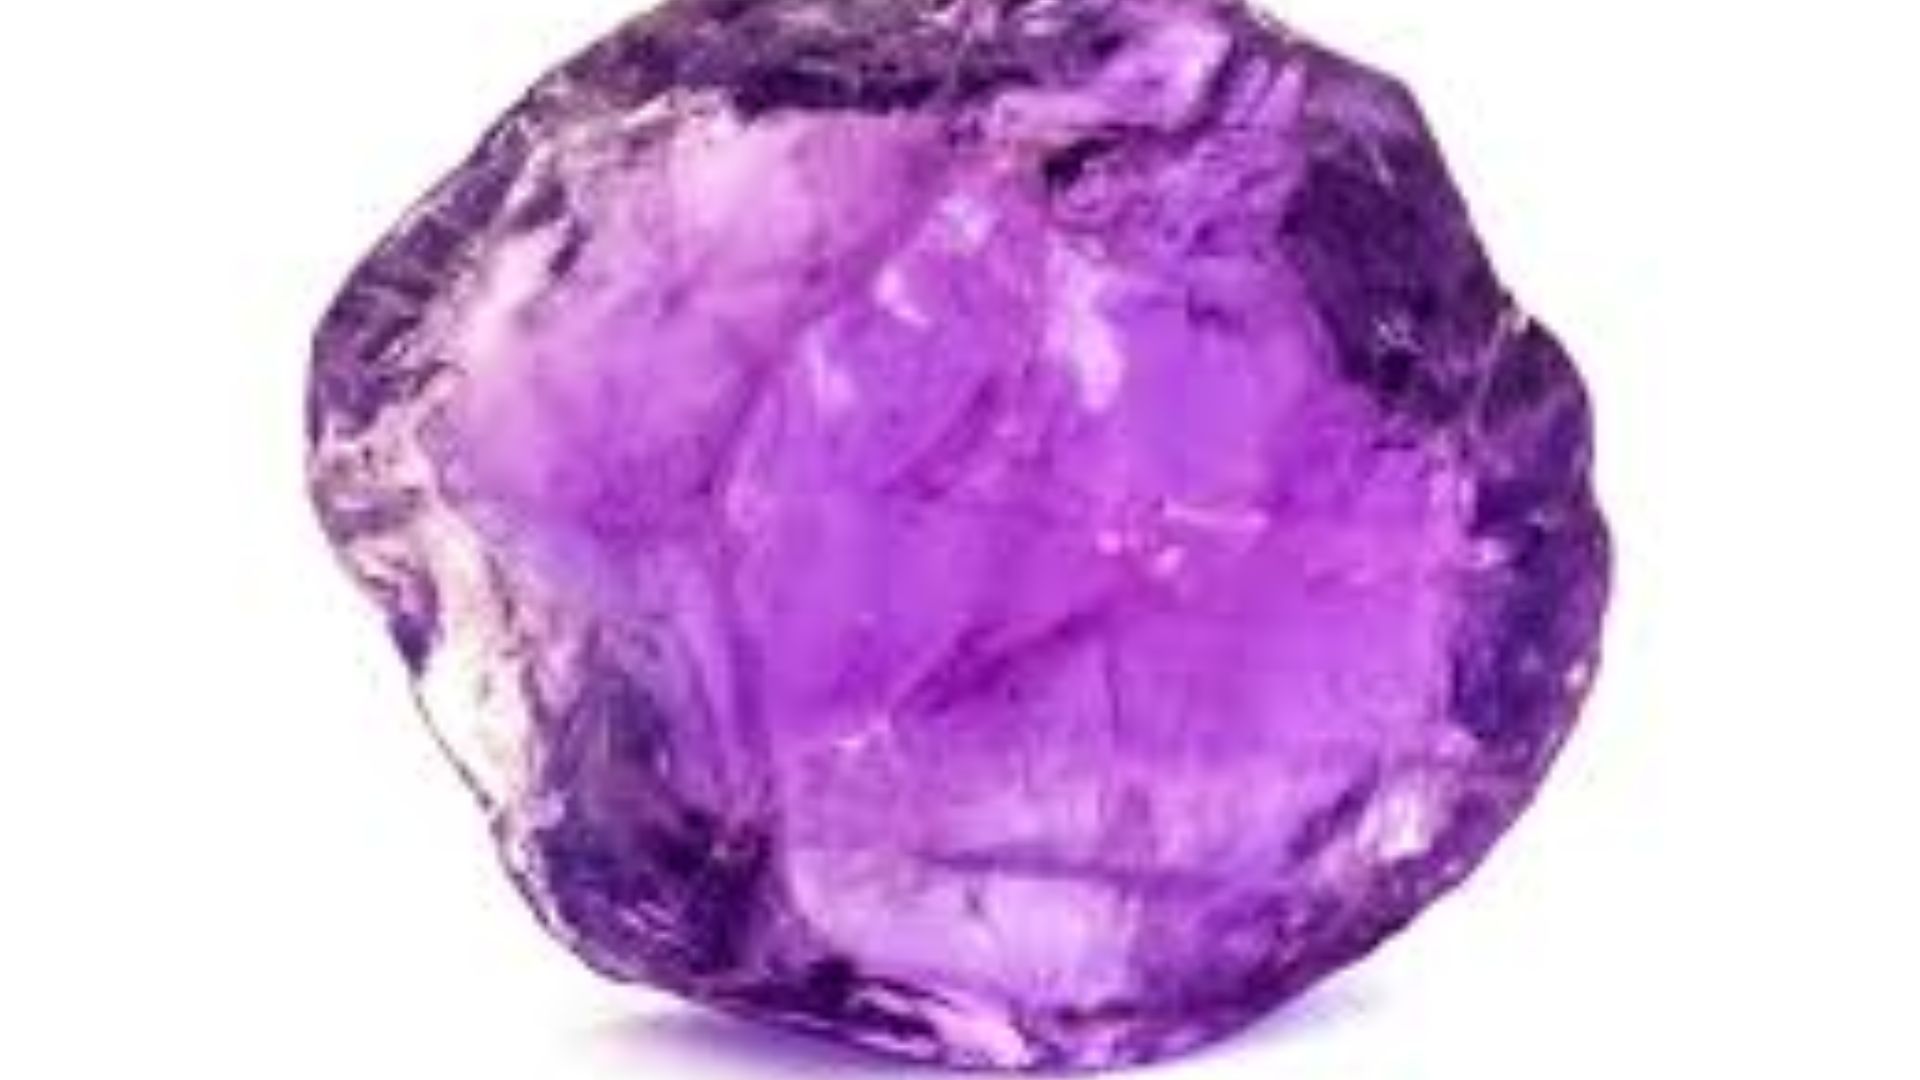 The Connection Between Numerology And Birthstone Color Symbolism - The Mystical Bond